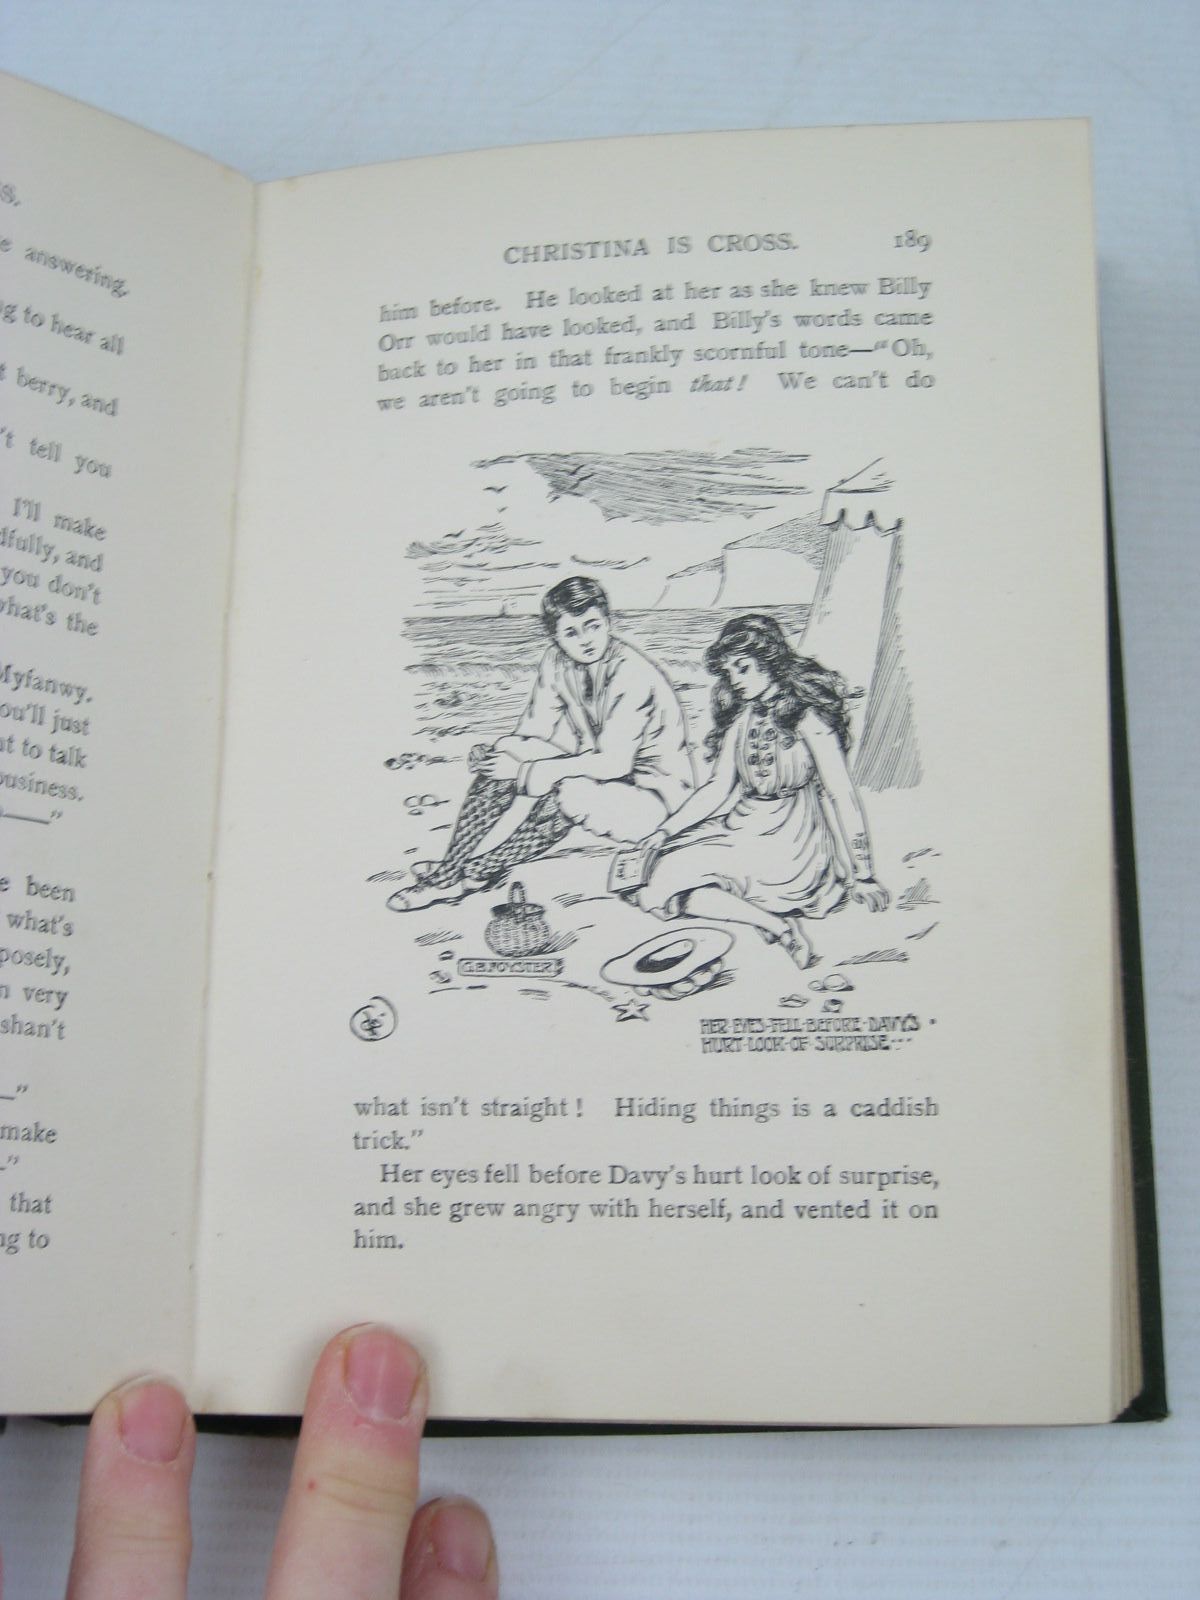 Photo of THE CONQUEST OF CHRISTINA written by Oxenham, Elsie J. illustrated by Foyster, G.B. published by Collins Clear-Type Press (STOCK CODE: 1404020)  for sale by Stella & Rose's Books